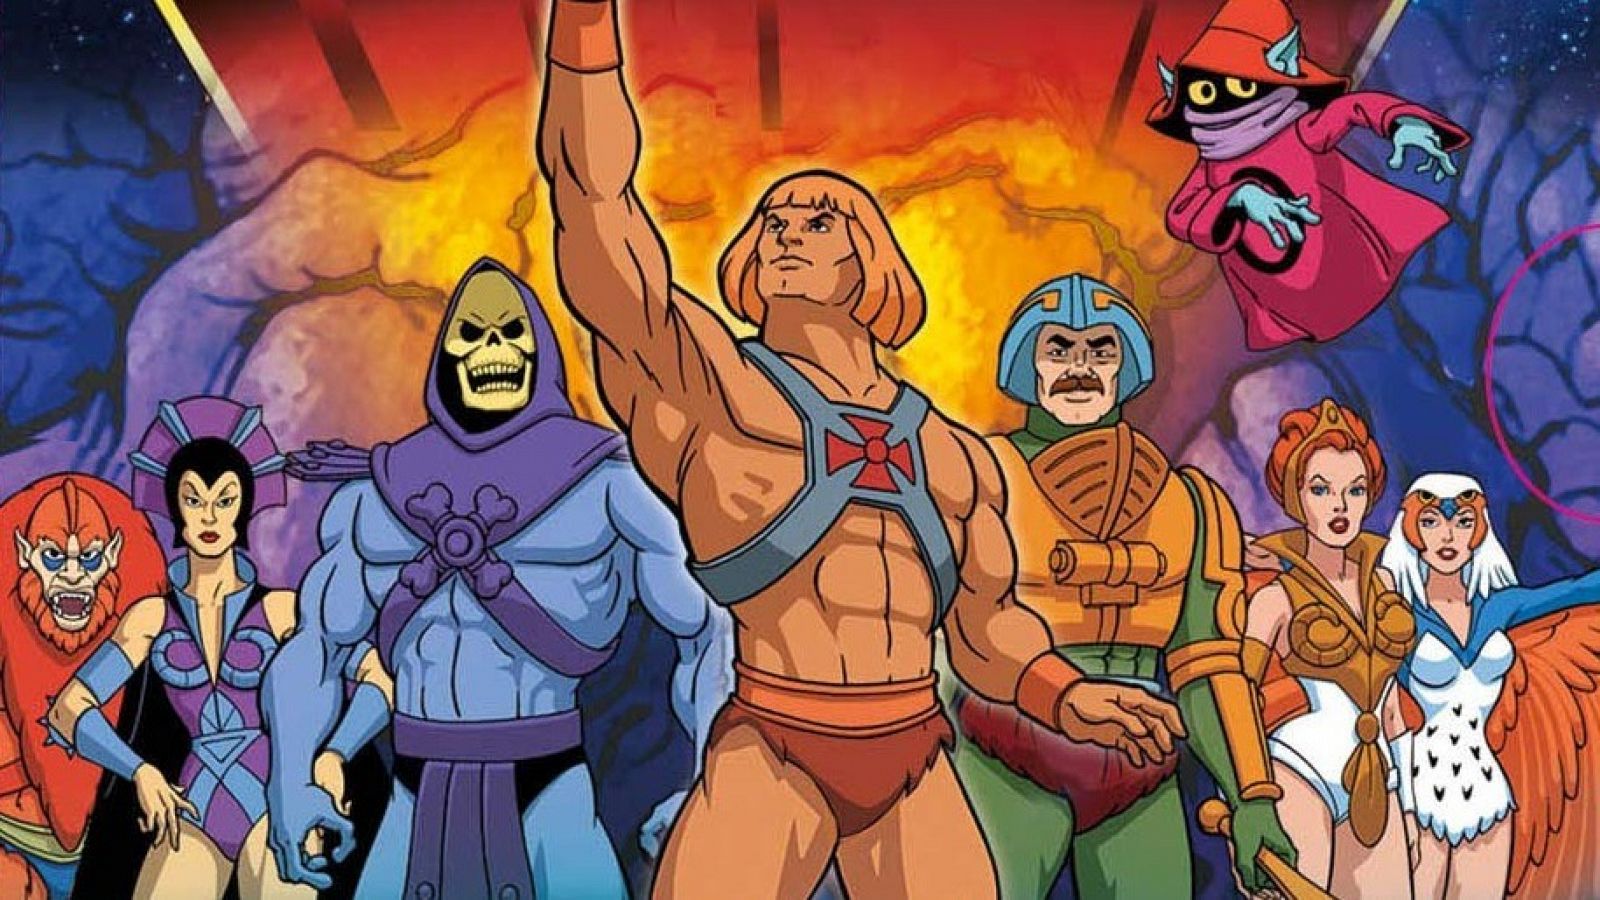 He-Man, She-Ra and the Masters of the Universe claim the power